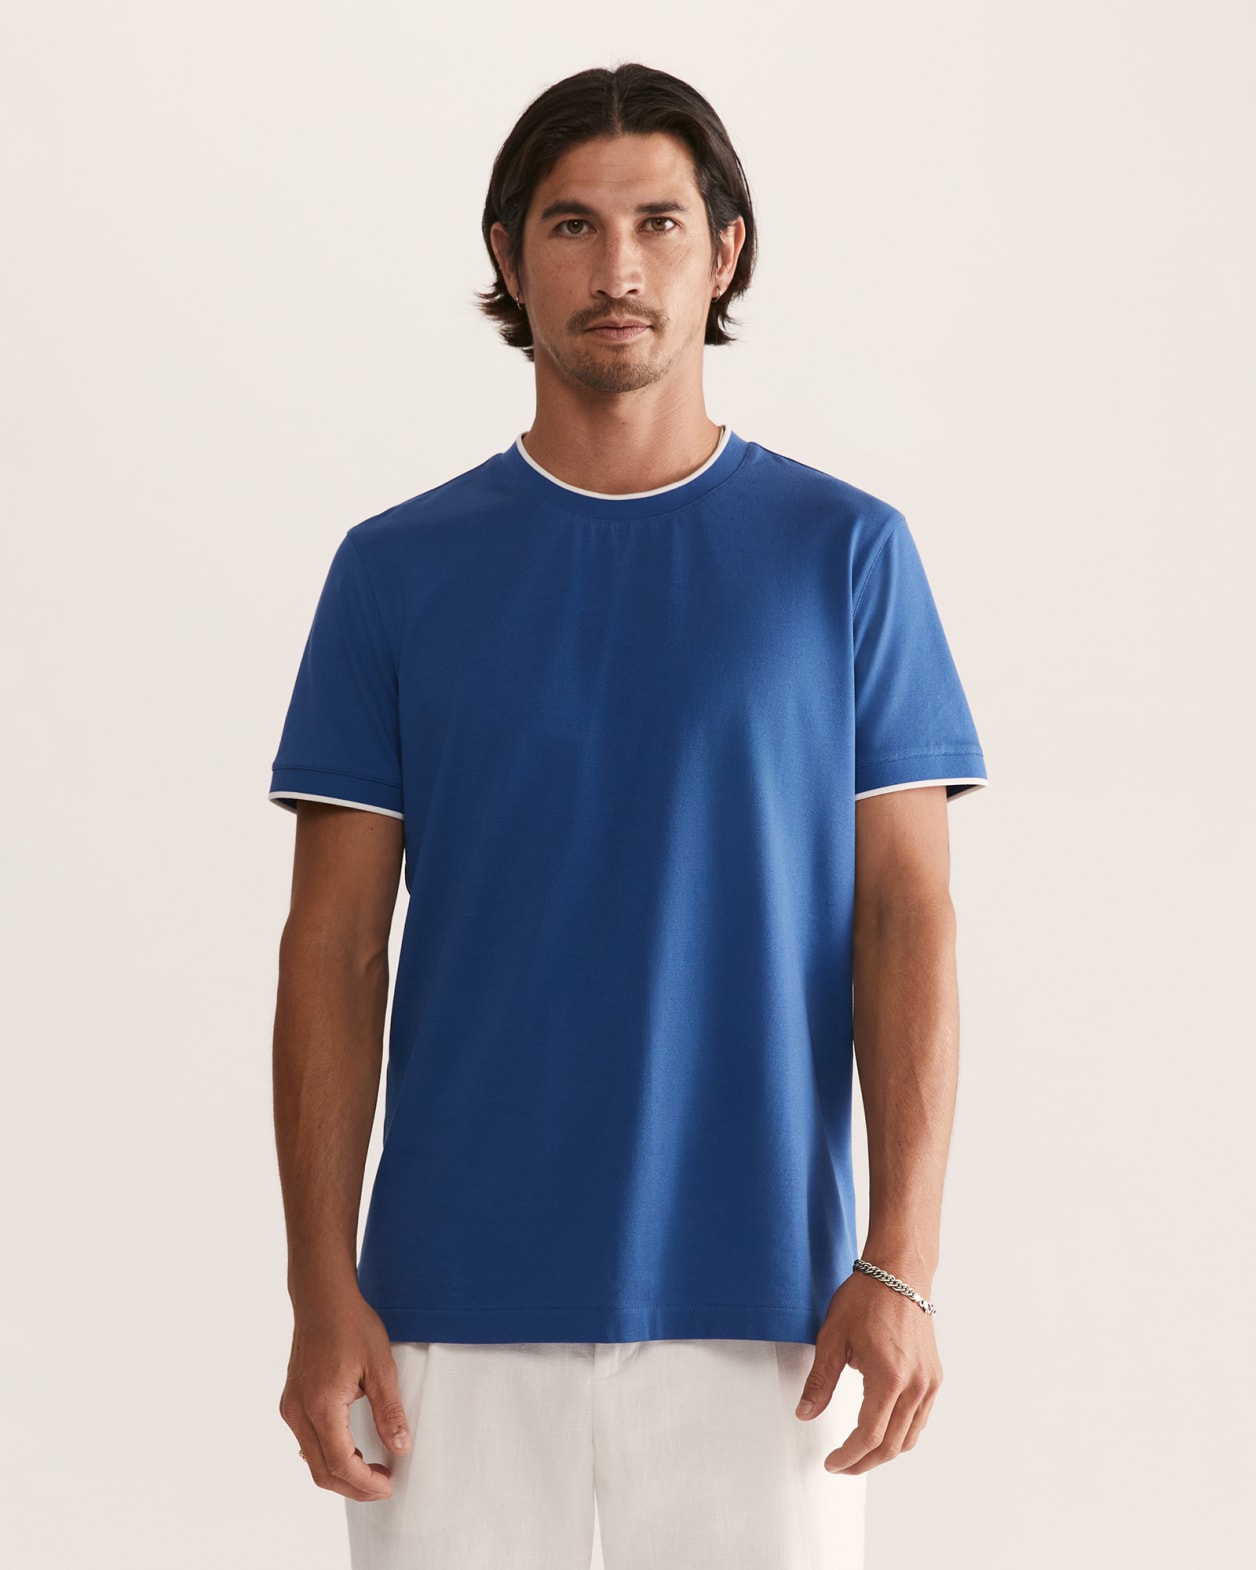 Andy Tipped Crew Tee in CERULEAN